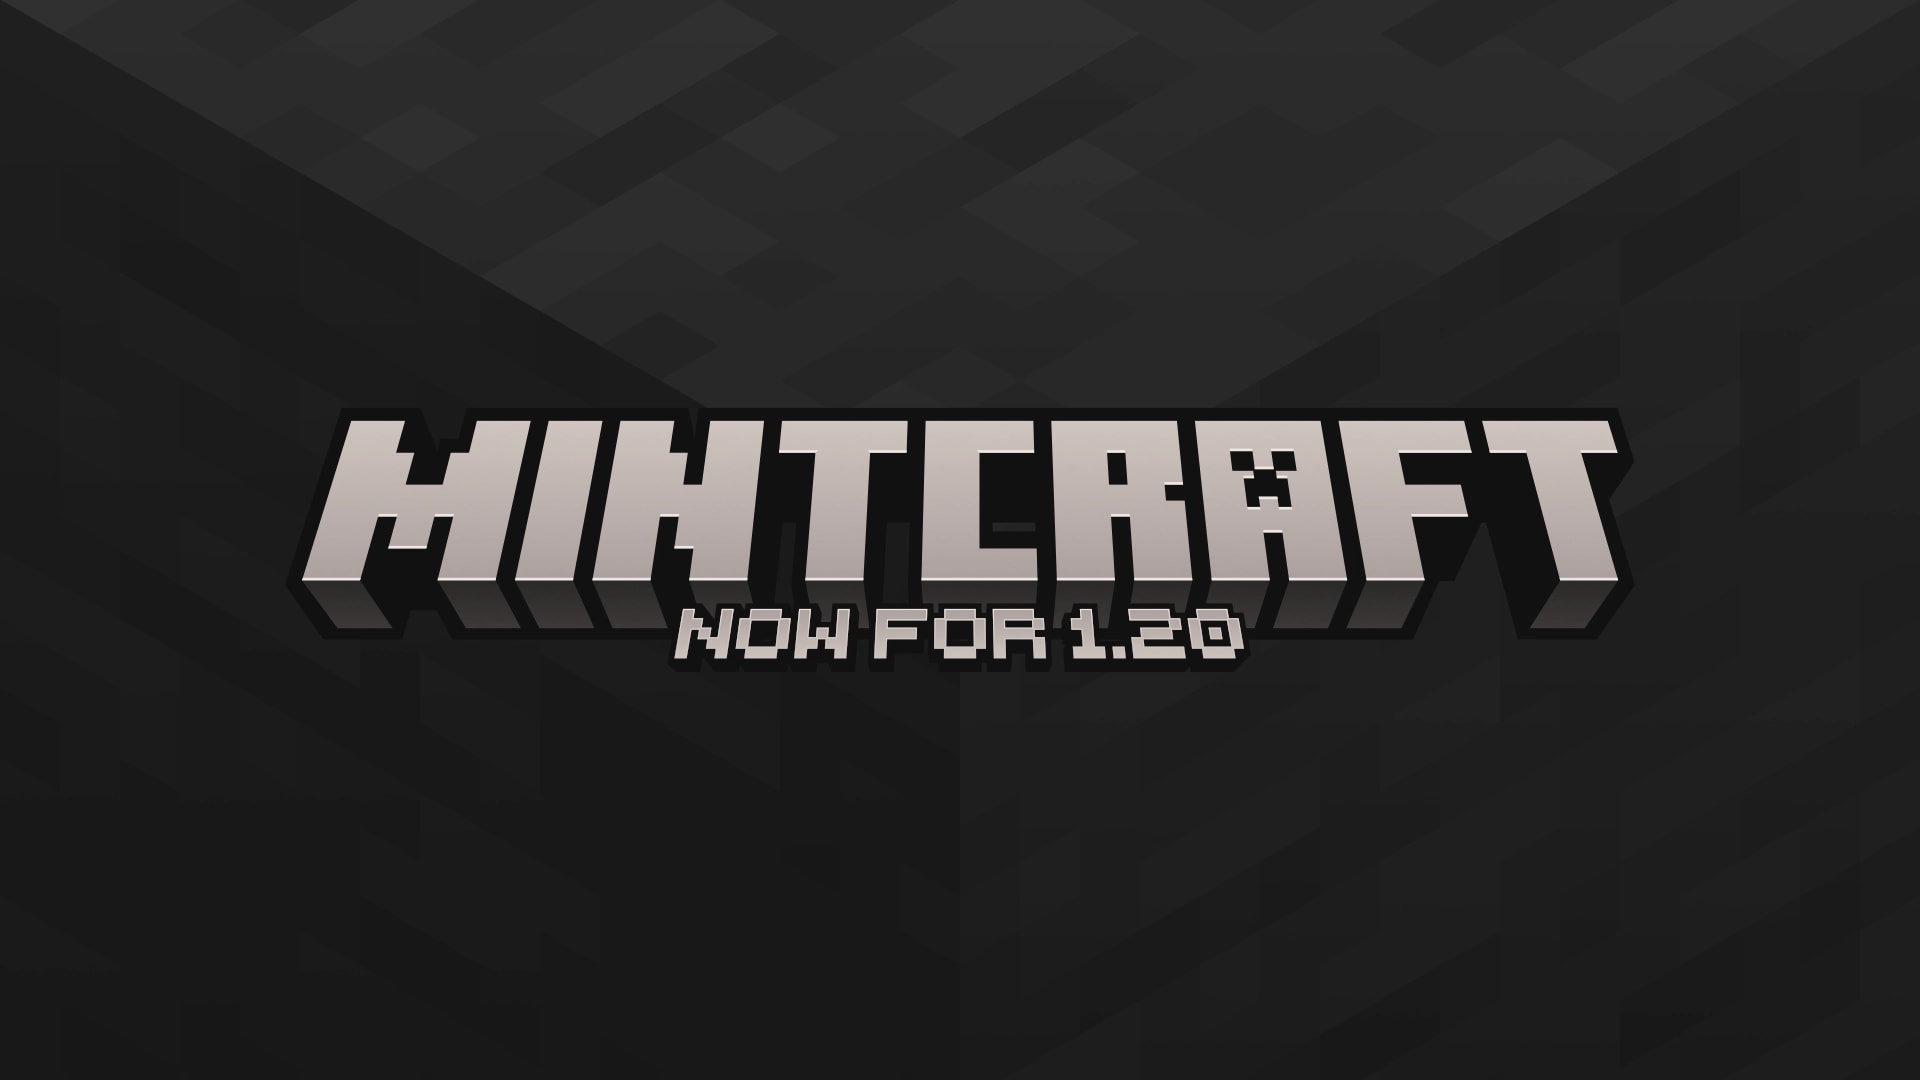 Mintcraft now available for 1.20.